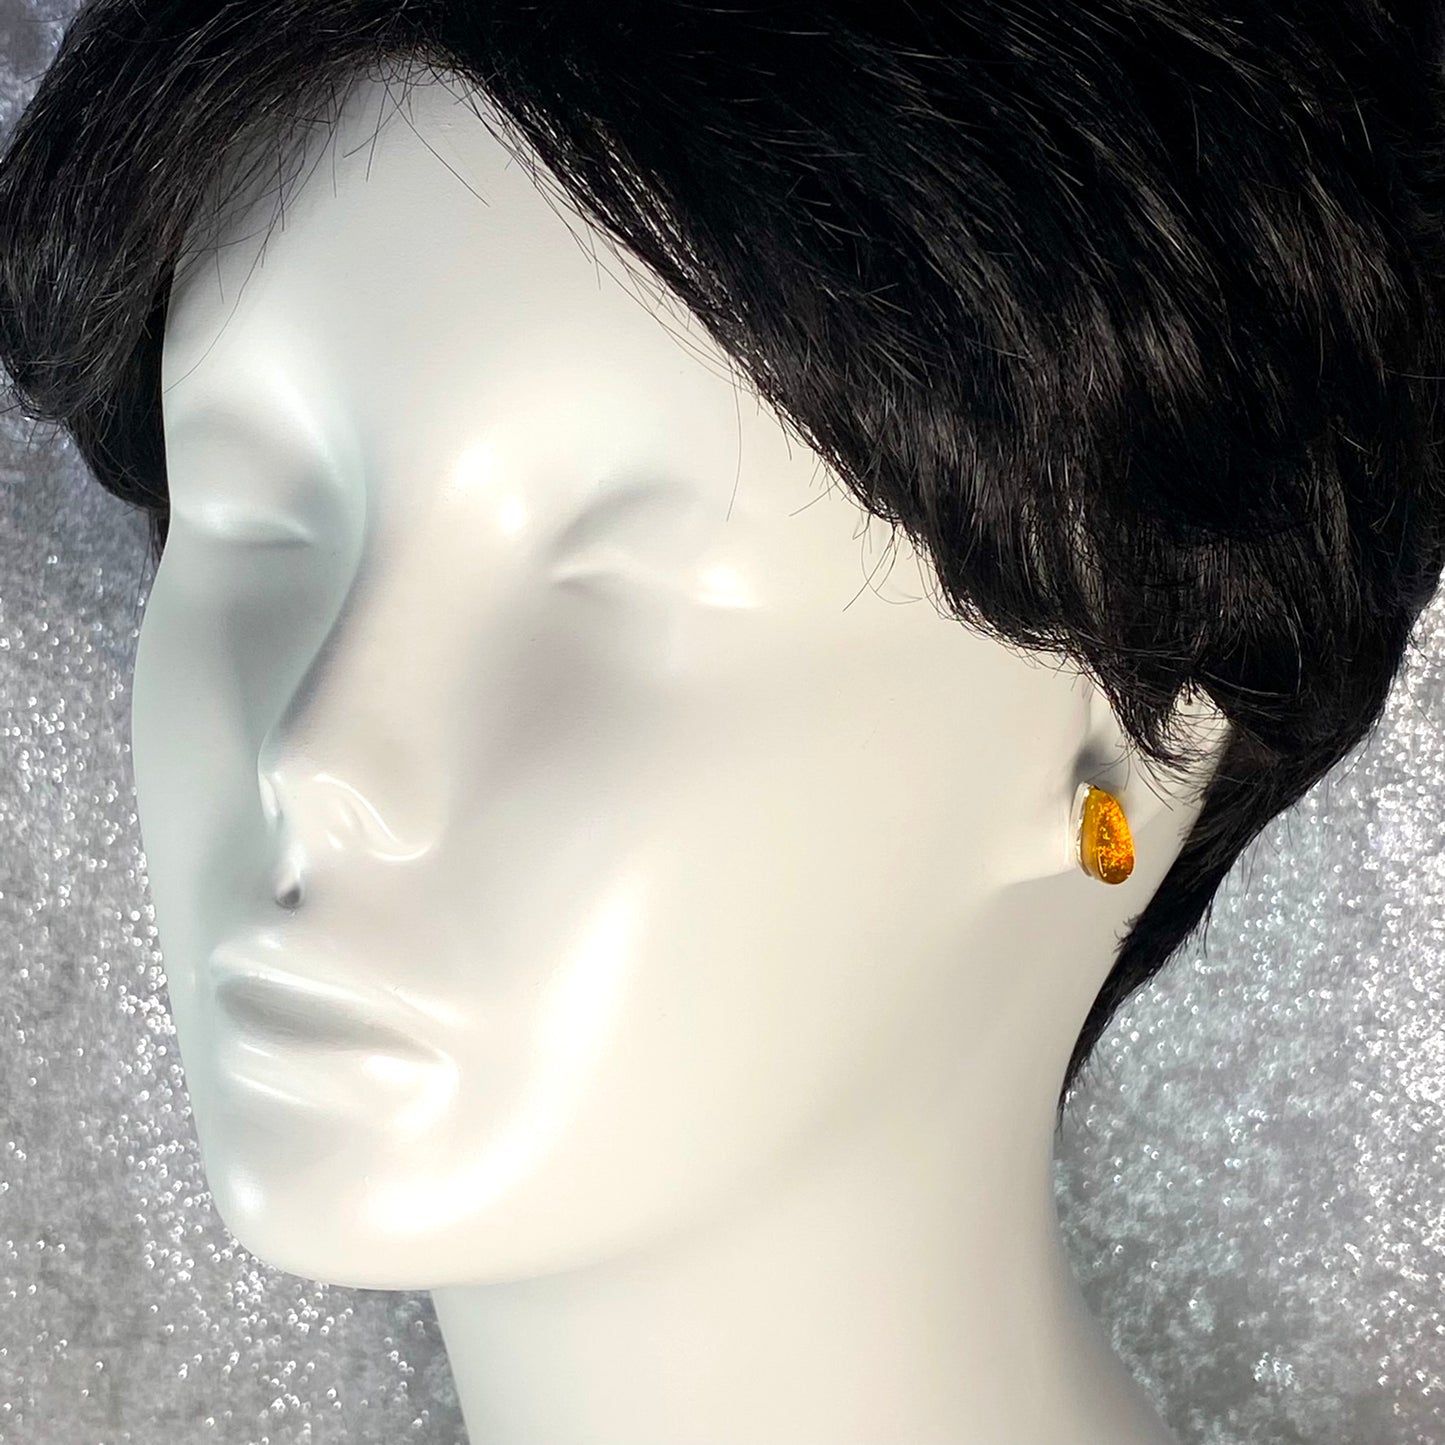 yellow teardrop post earrings, fused glass, glass jewelry, glass and silver jewelry, handmade, handcrafted, American Craft, hand fabricated jewelry, hand fabricated jewellery, Athen, Georgia, colorful jewelry, sparkle, bullseye glass, dichroic glass, art jewelry